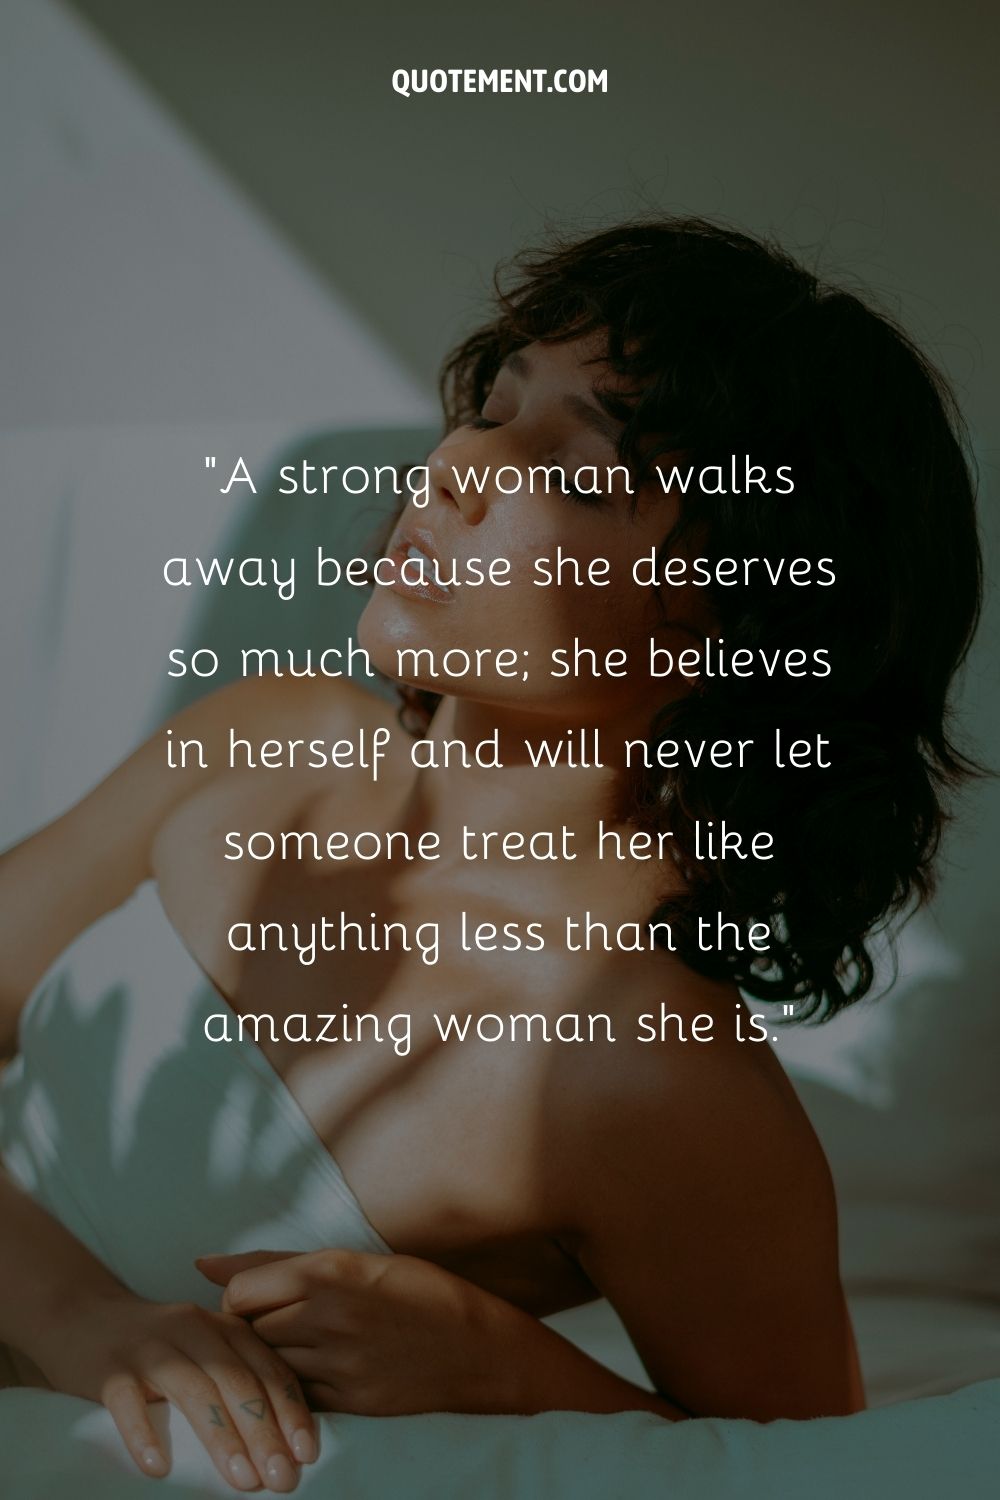 Woman's calming energy representing quote about walking away from a relationship